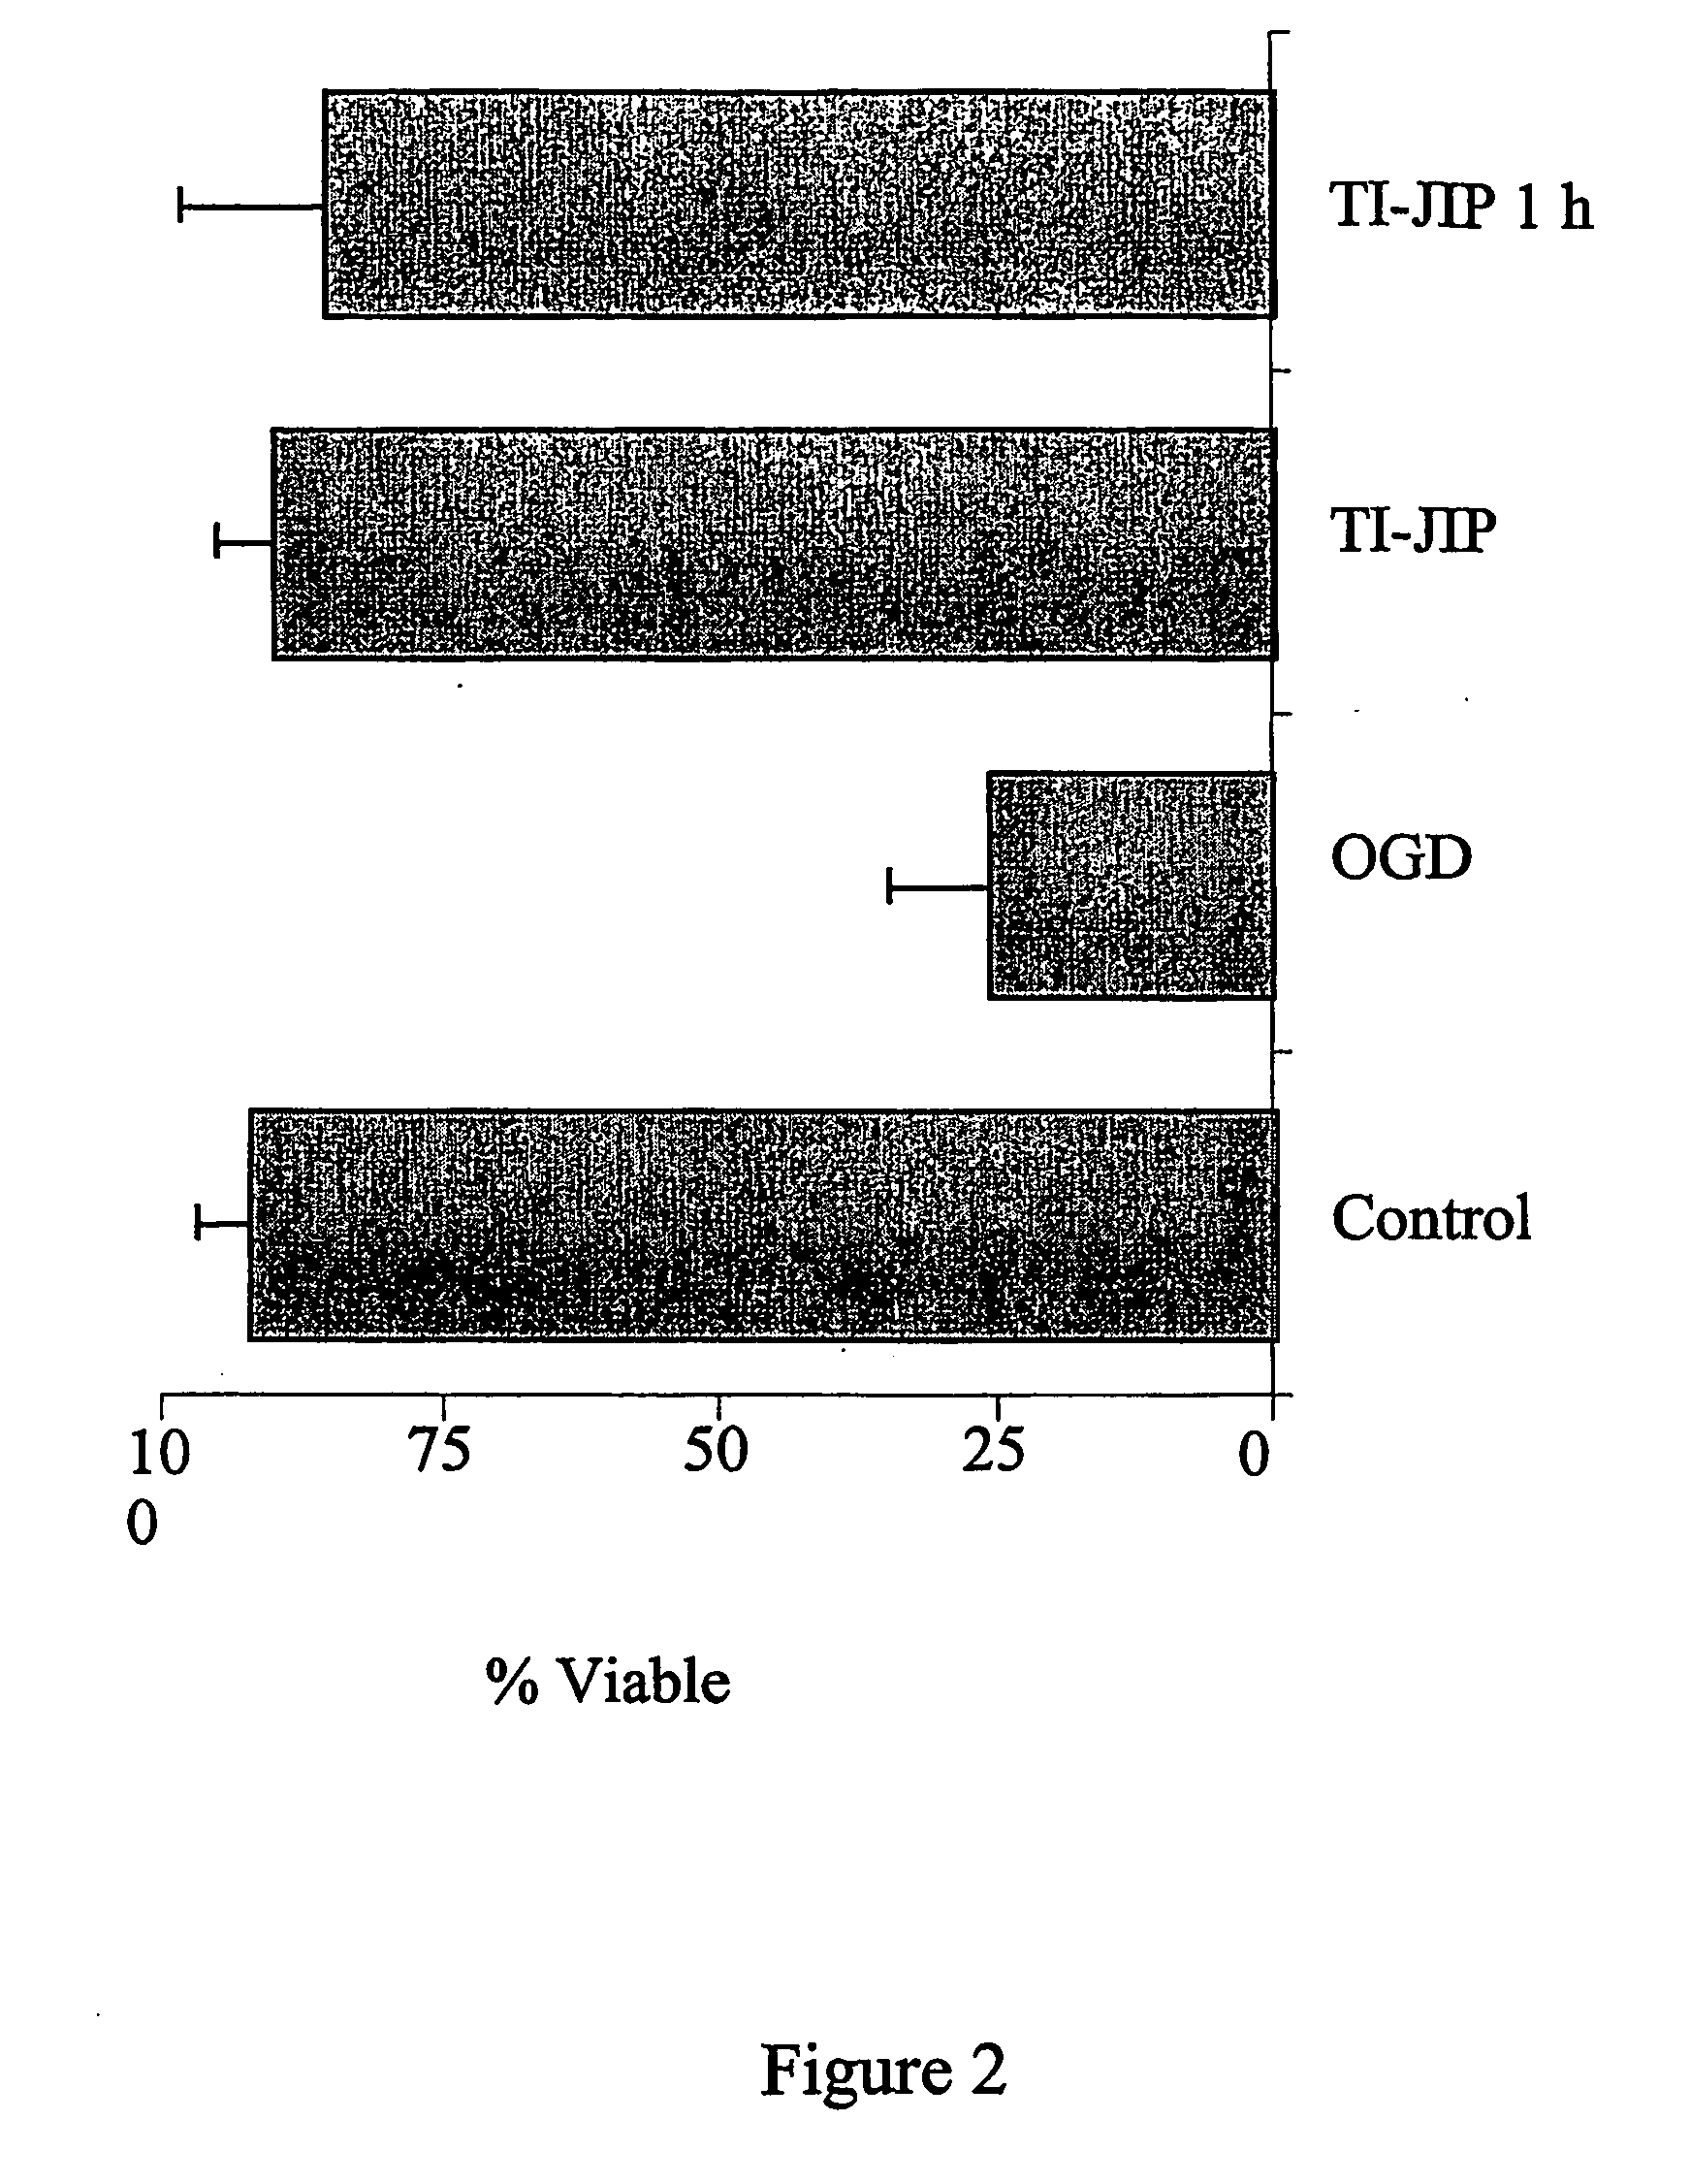 Genetic Screen for Interaction Interface Mapping